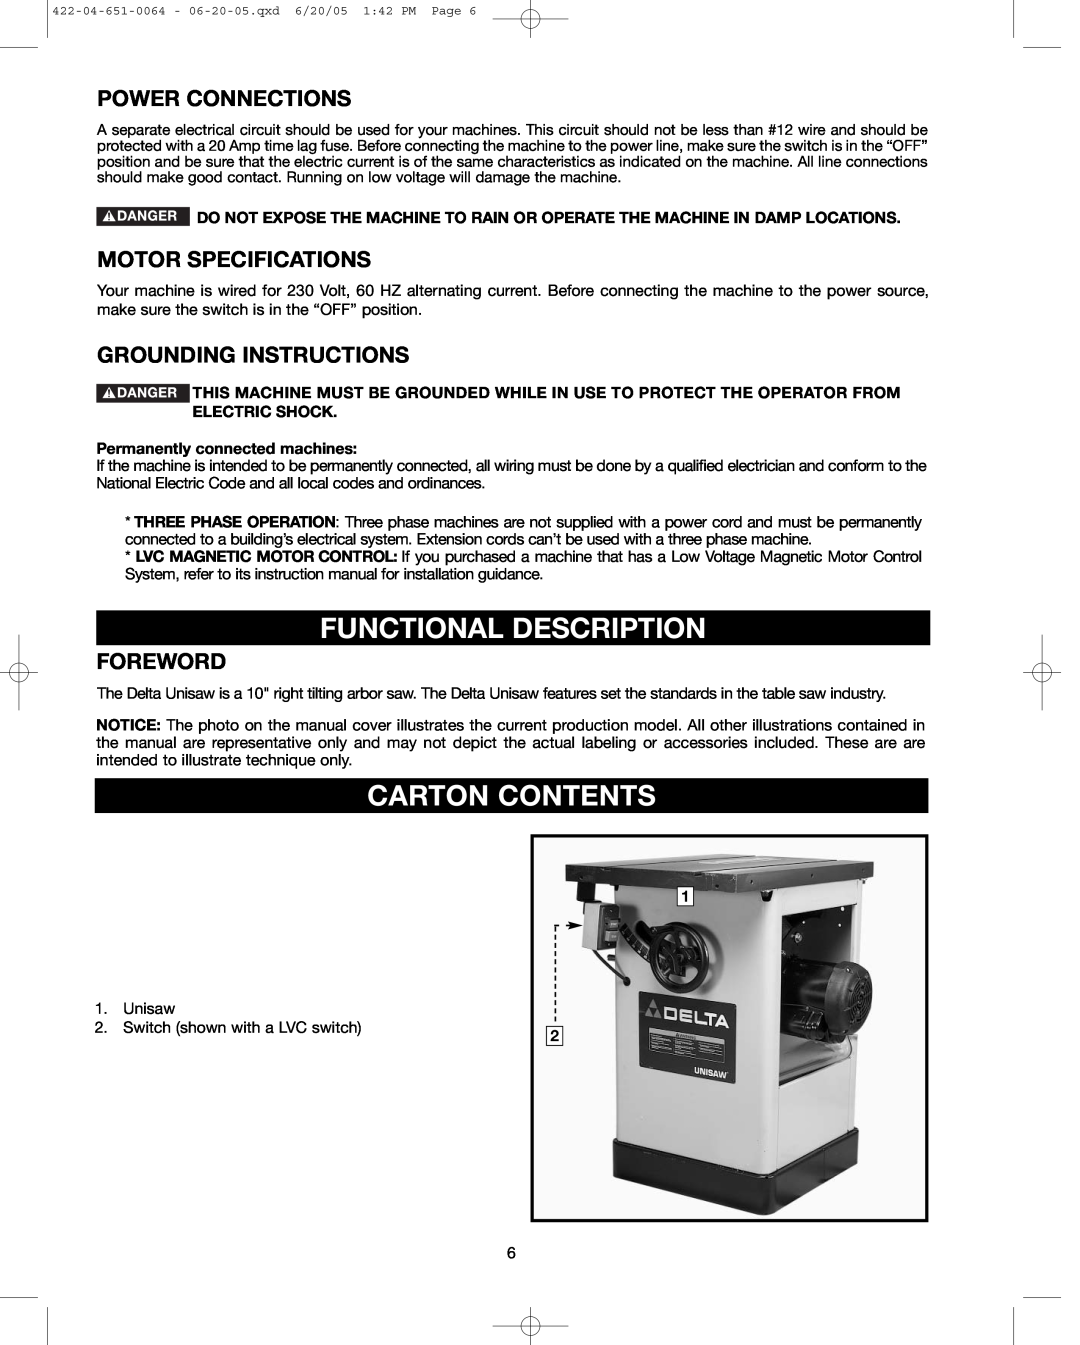 Delta 34-814 Functional Description, Carton Contents, Power Connections, Motor Specifications, Grounding Instructions 